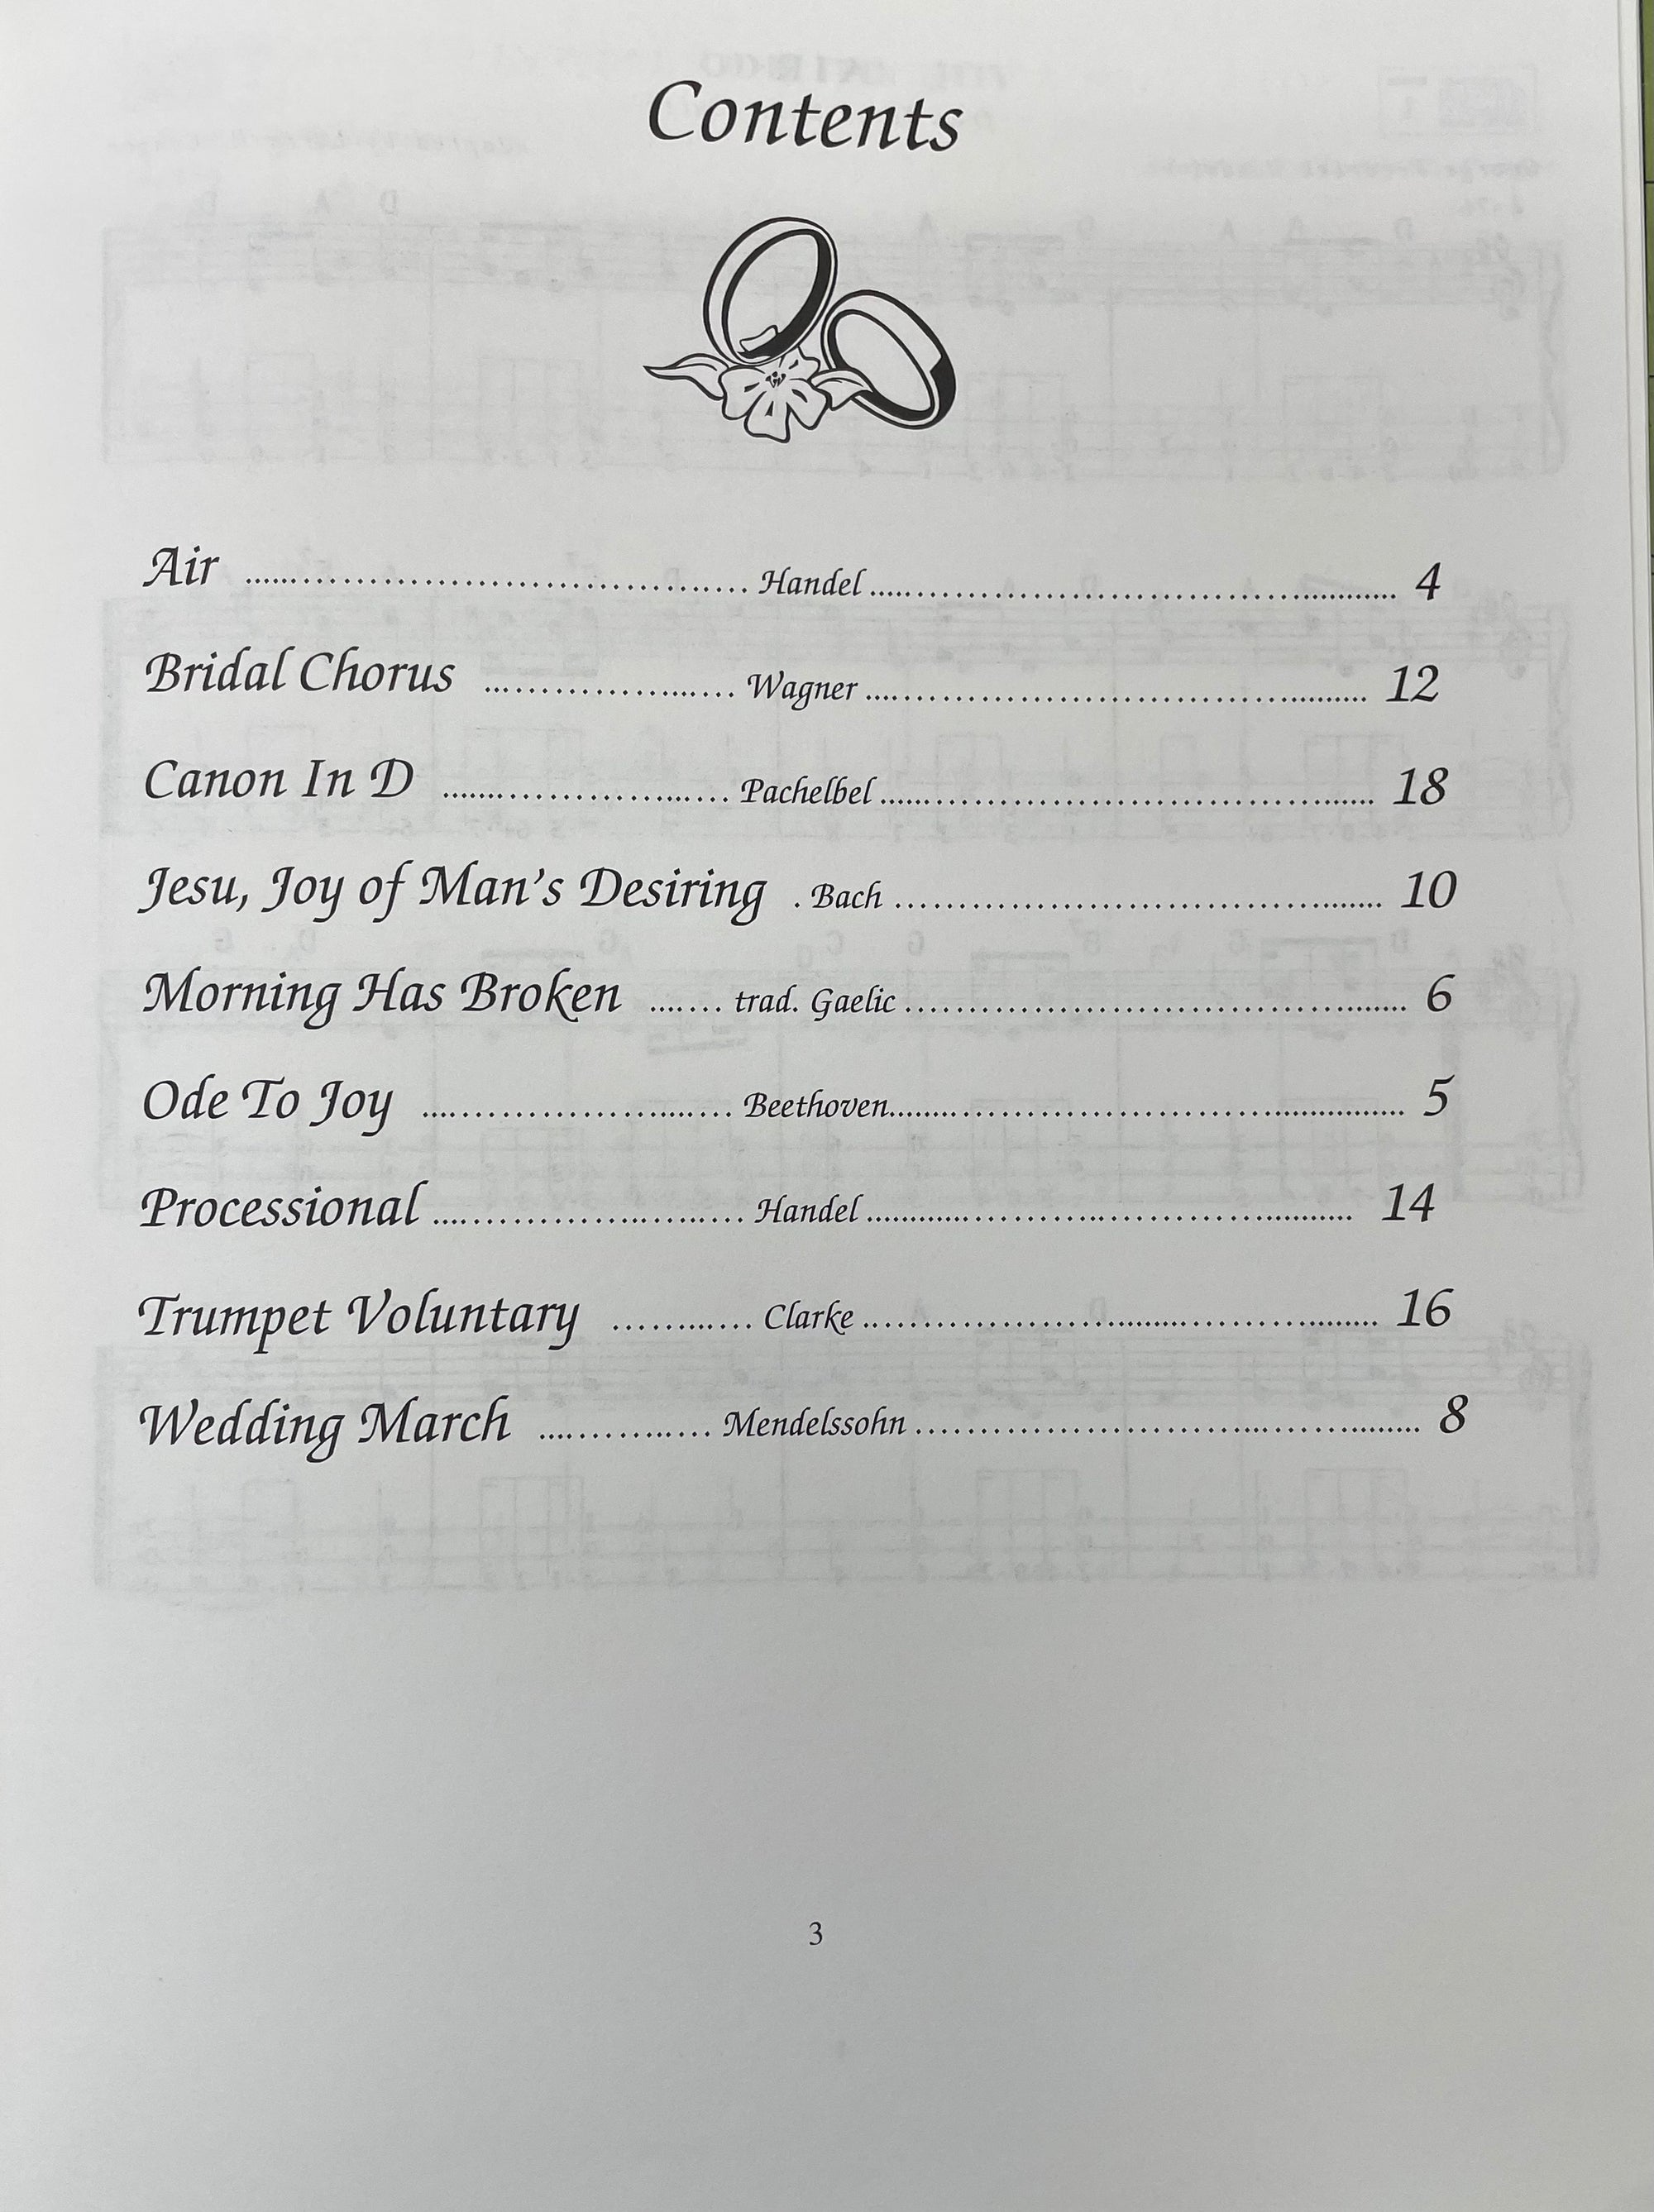 Table of contents from Traditional Wedding Classics for Mountain Dulcimer by Larry Conger listing advanced arrangements for wedding ceremonies, including works by Handel, Wagner, Bach, and other composers, with accompanying page numbers.